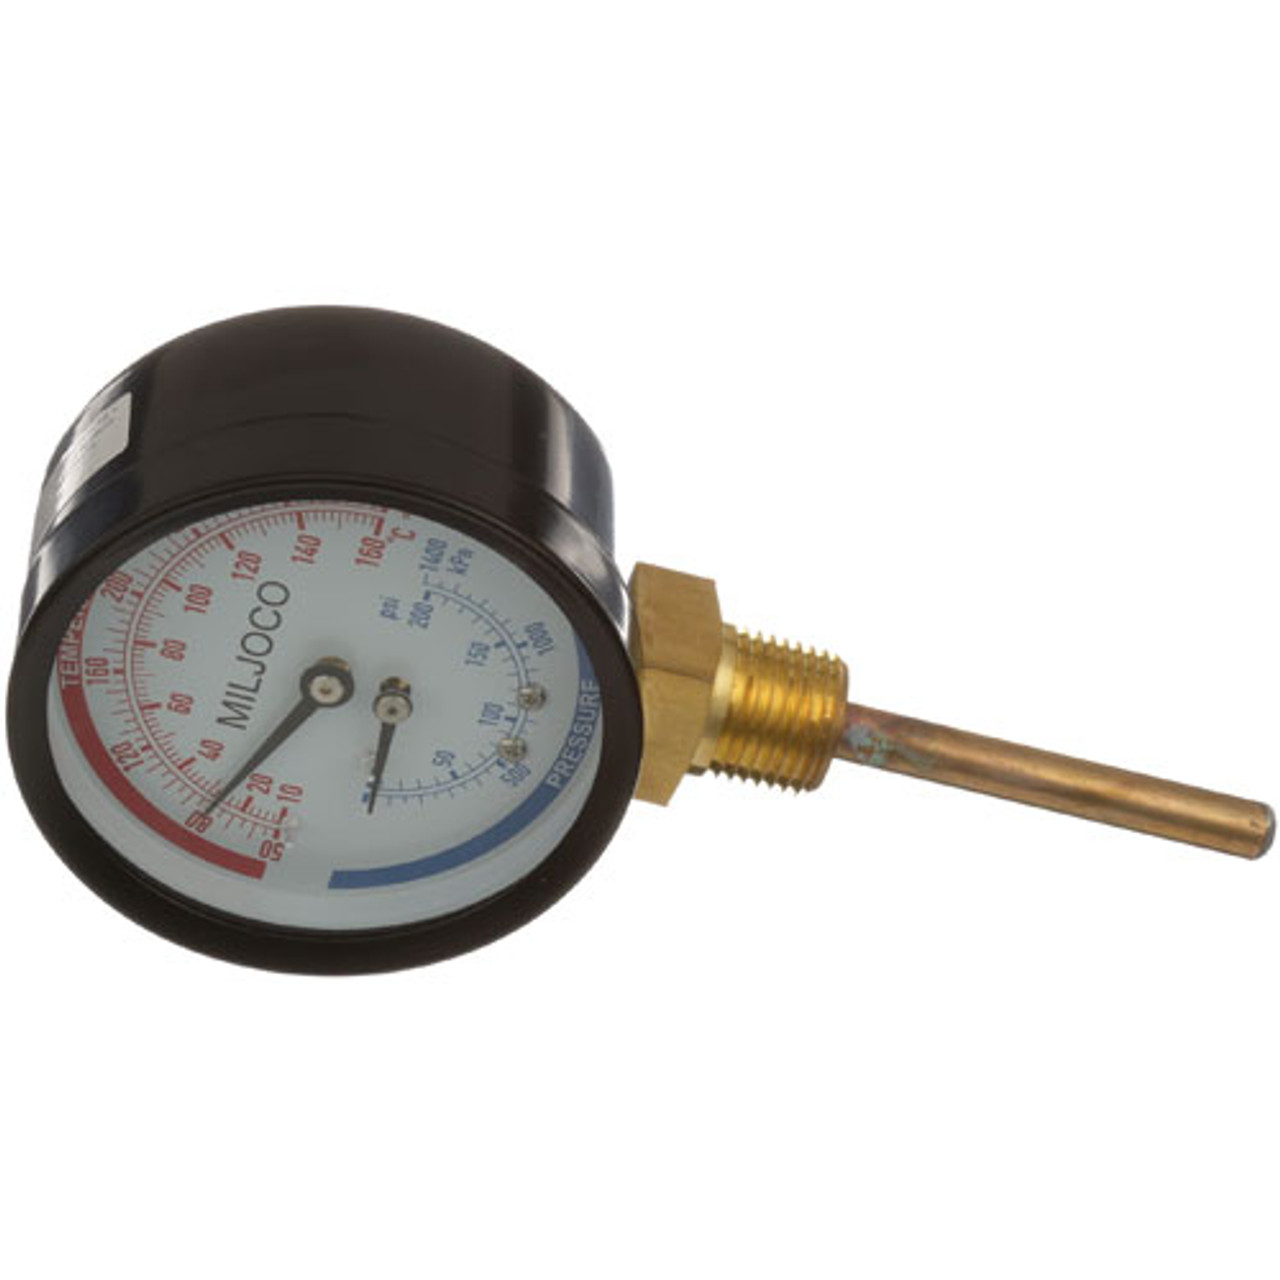 Press/Temp Gauge 3, 50-290 F, 0-200 Psi - Replacement Part For Hatco 03.01.003.00